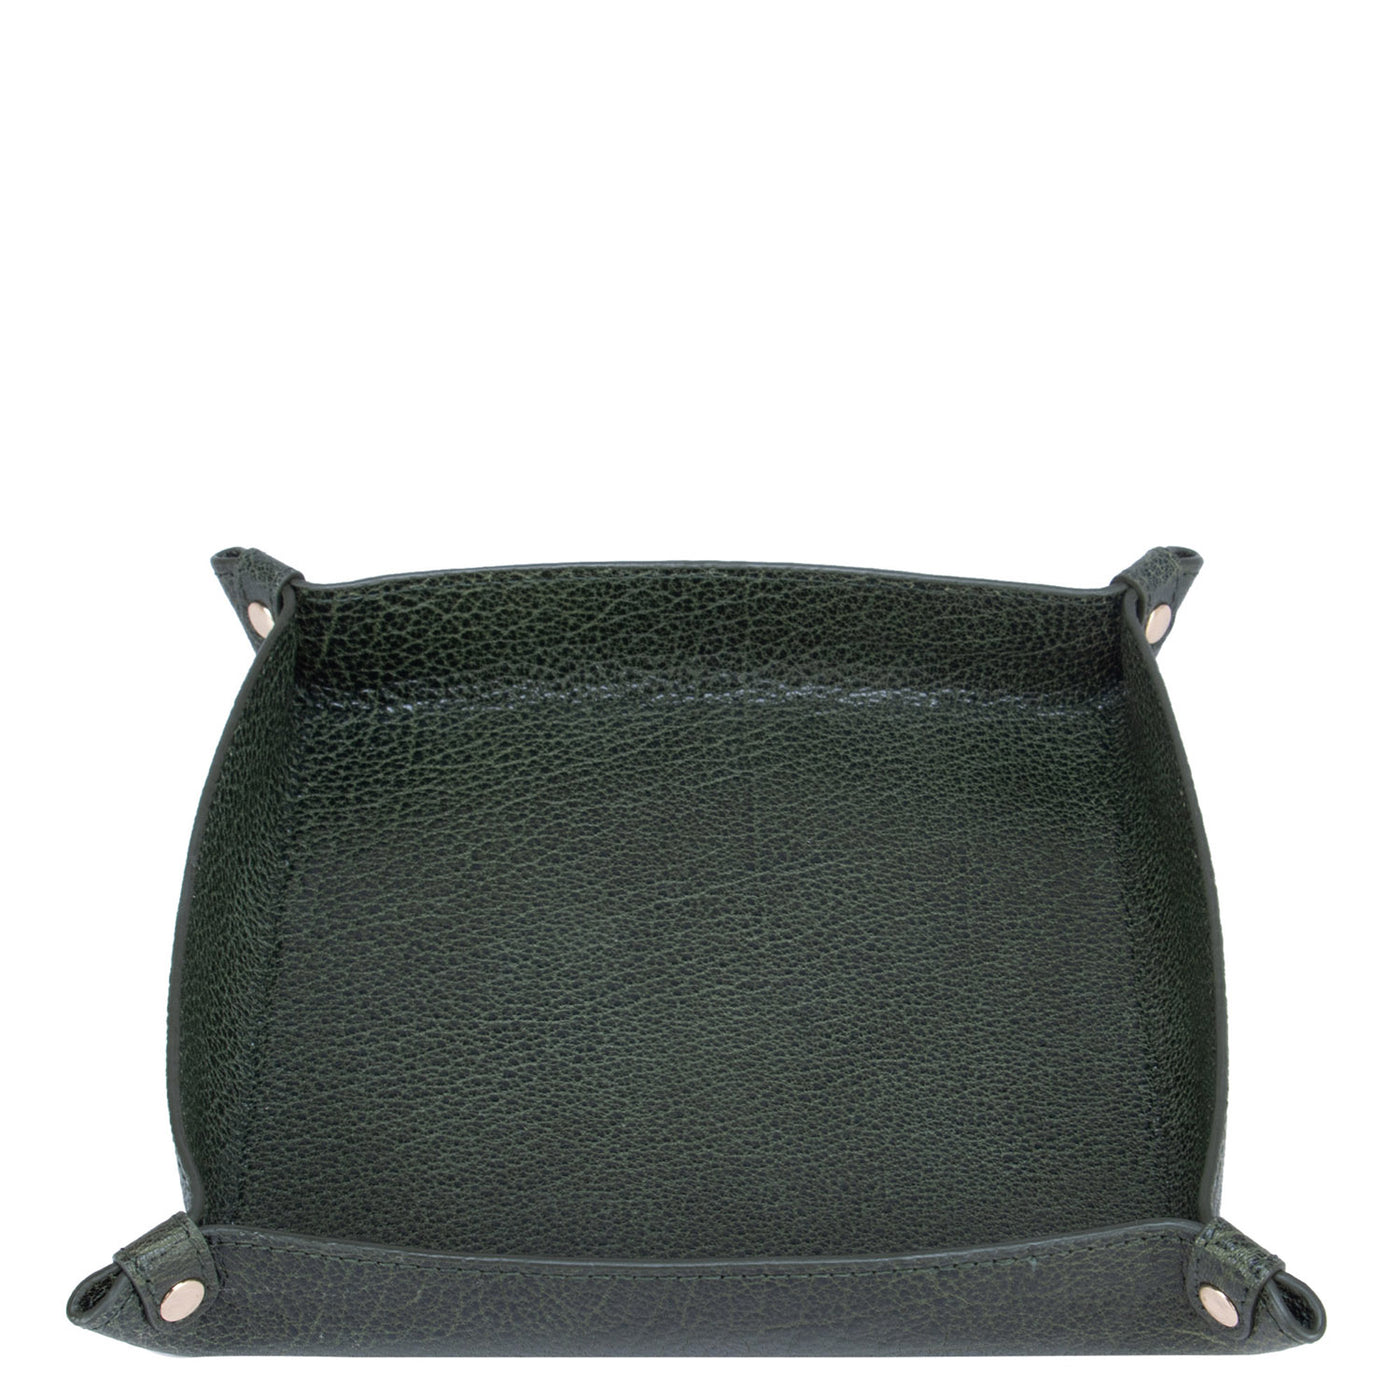 Elephant Pattern Leather Tray - Green